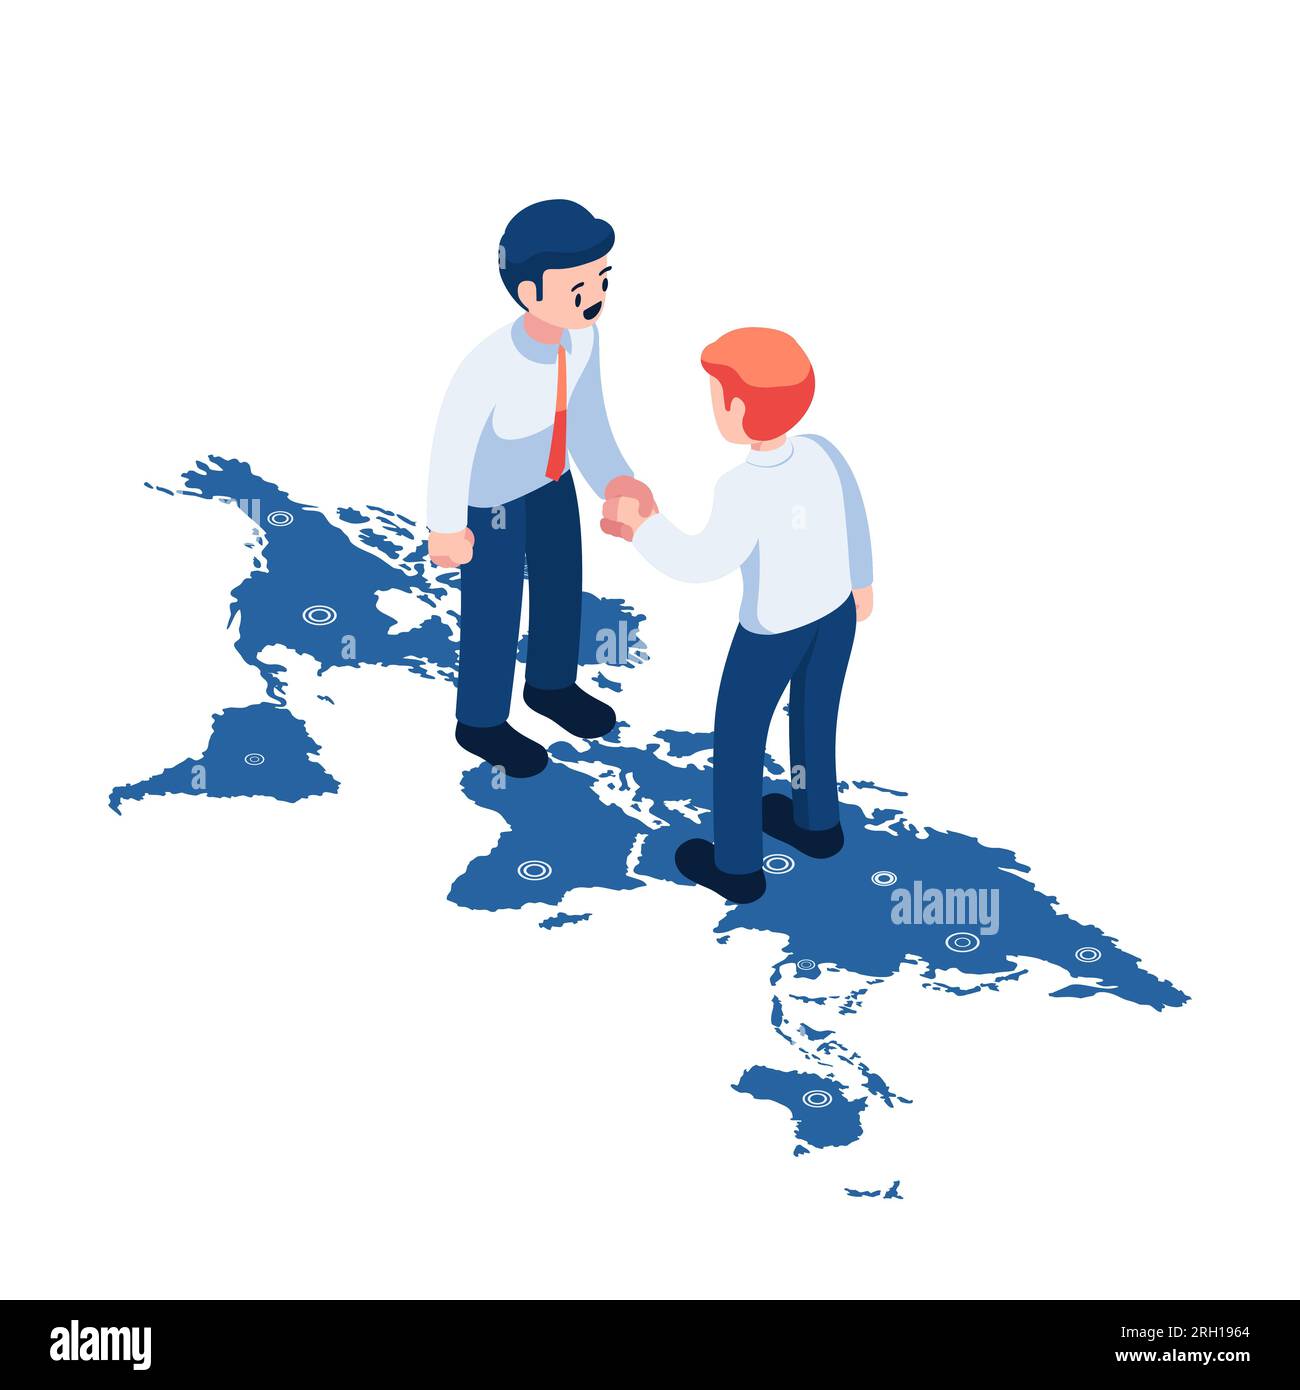 Flat 3d Isometric Businessman or Politician Shaking Hands Over World Map. International Negotiations and Global Business Concept. Stock Vector